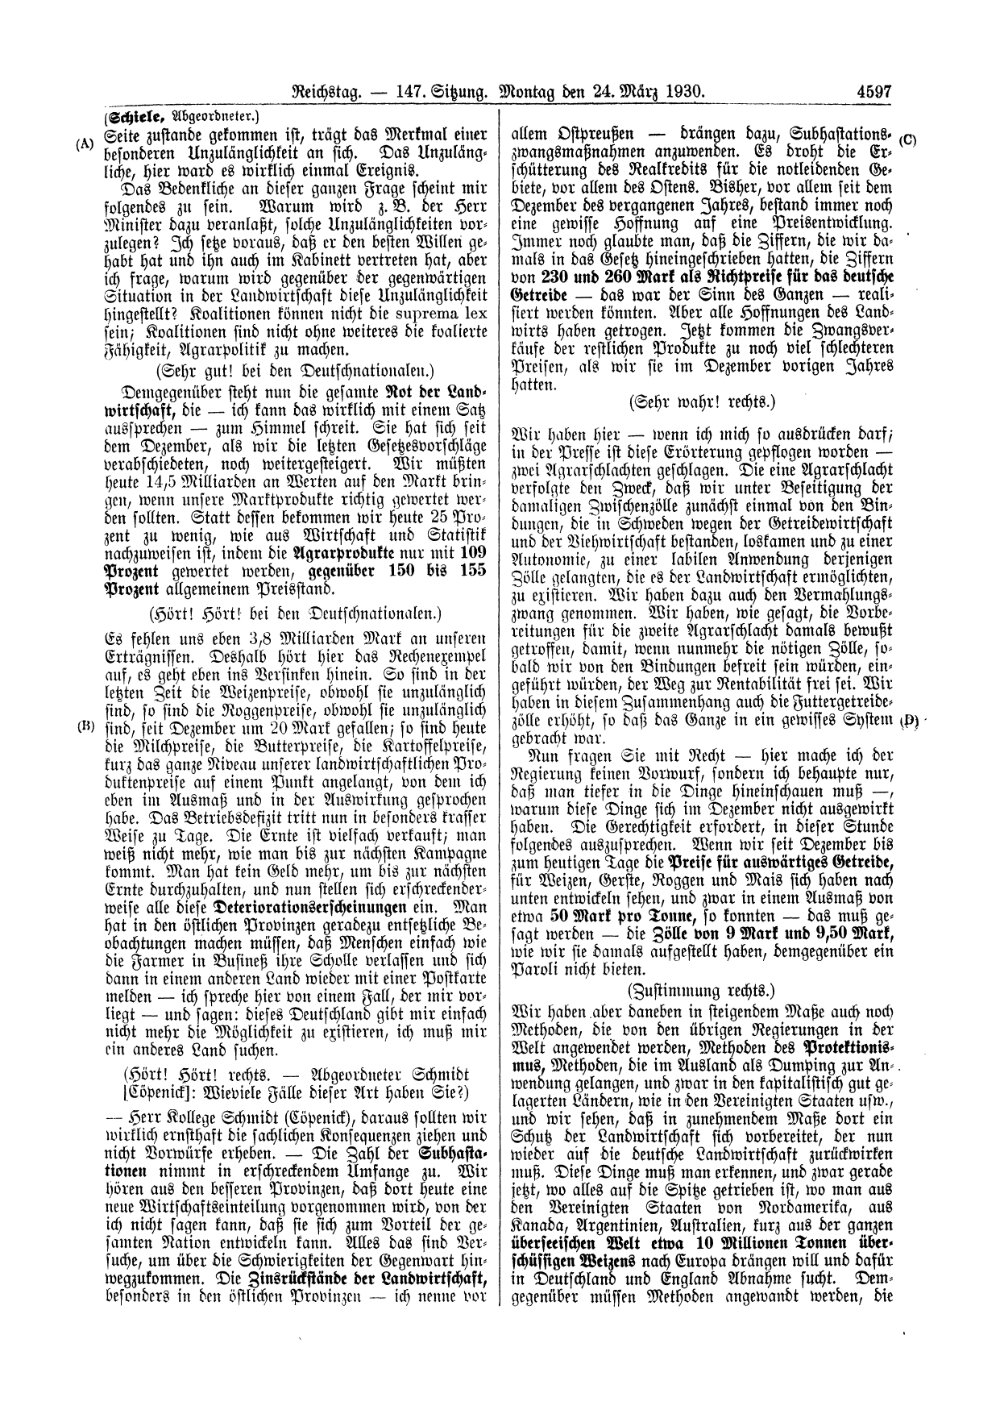 Scan of page 4597